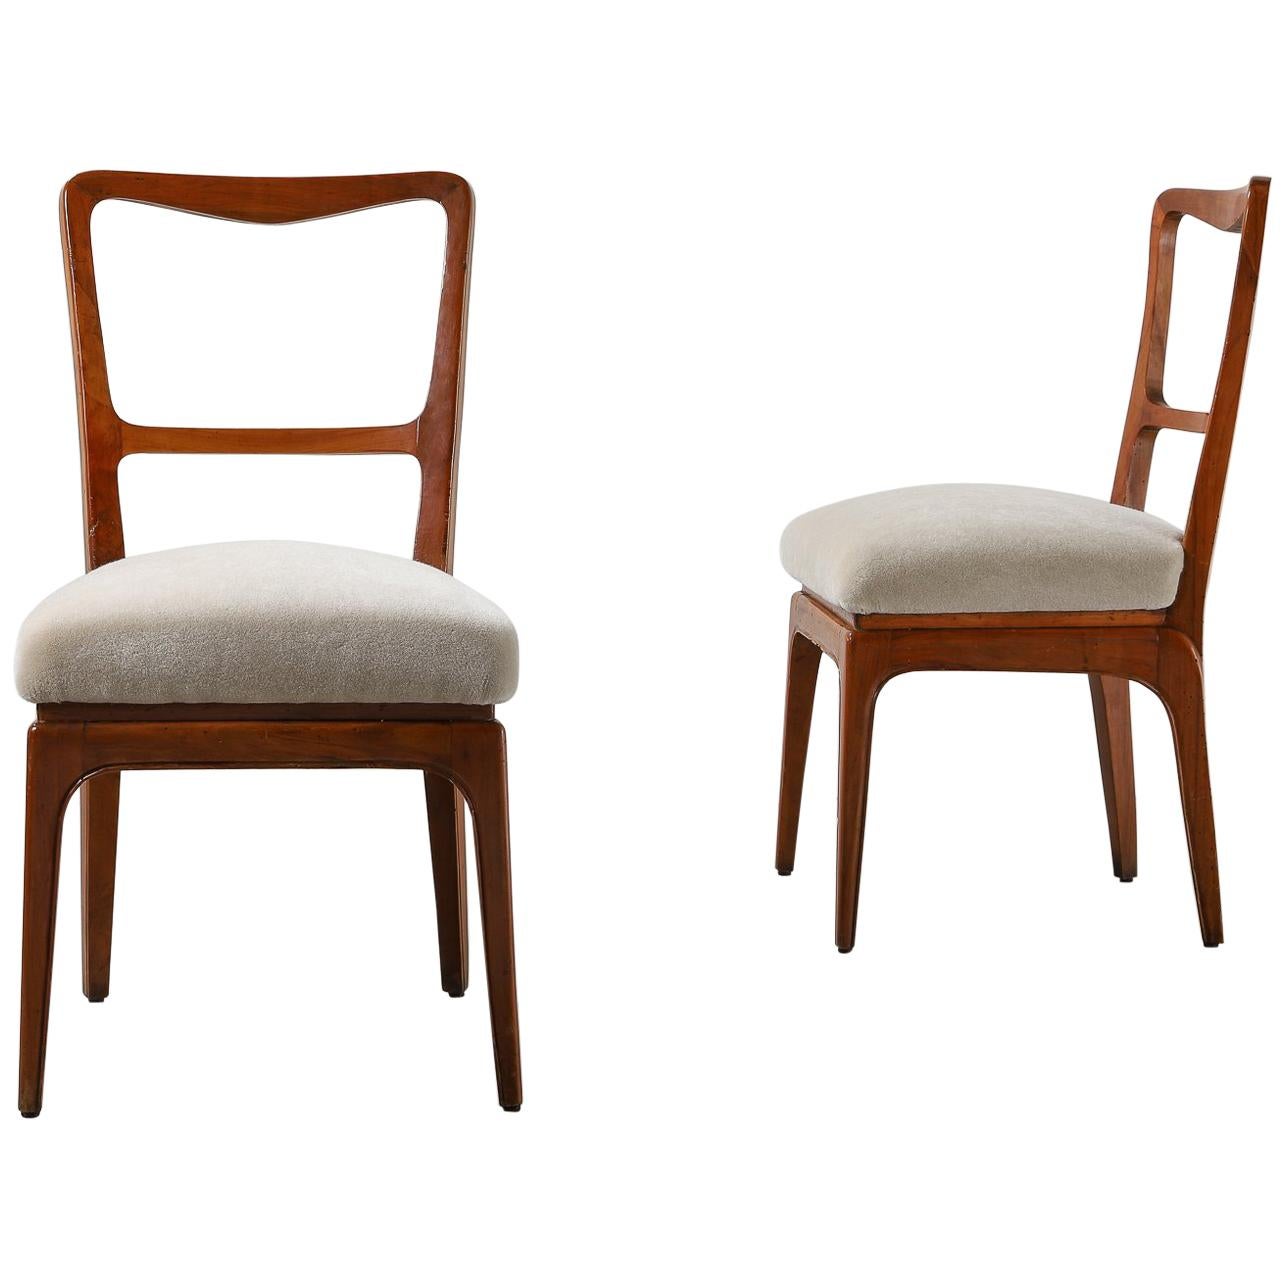 Pair of Cherry Wood & Fabric Chairs by  Paolo Buffa in Bespoke Mohair Velvet